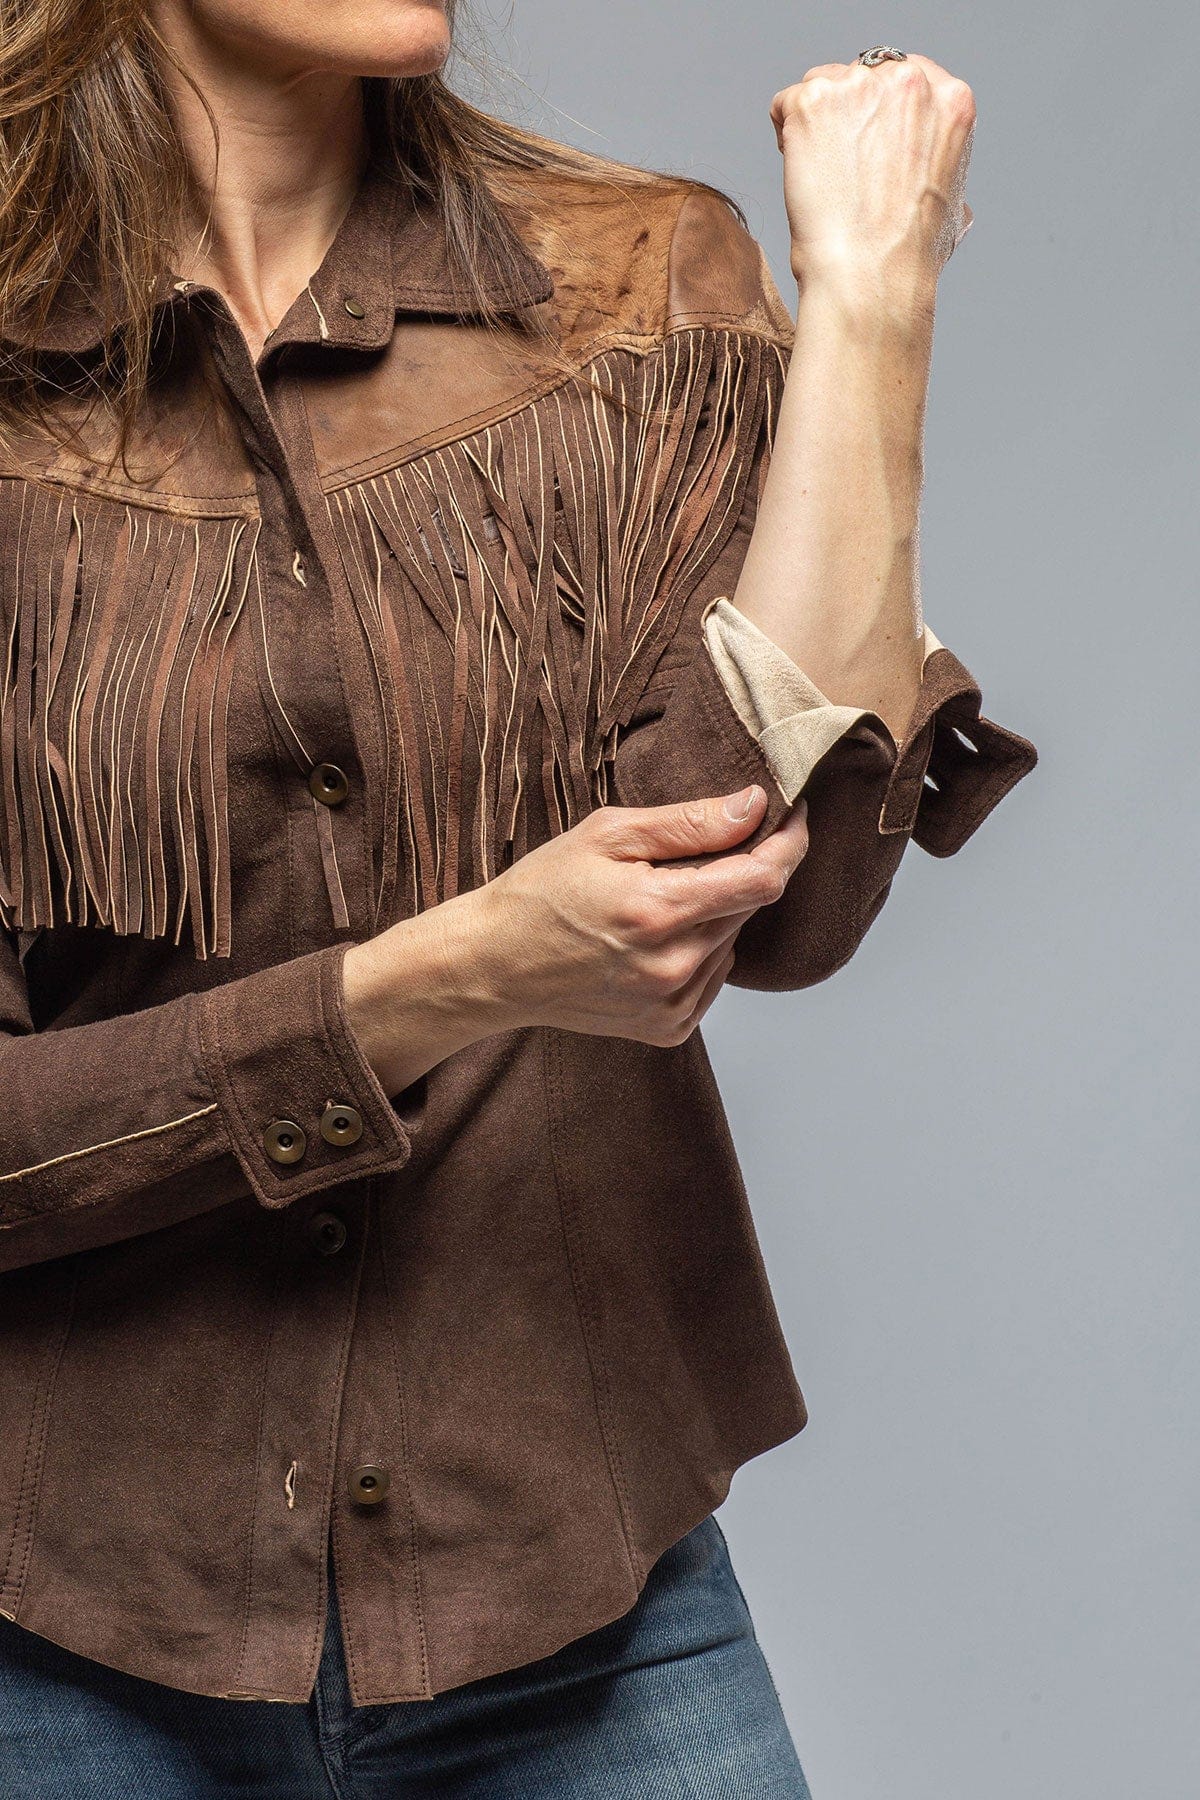 Escalera Hair-On Suede Fringe Shirt In Brown - AXEL'S